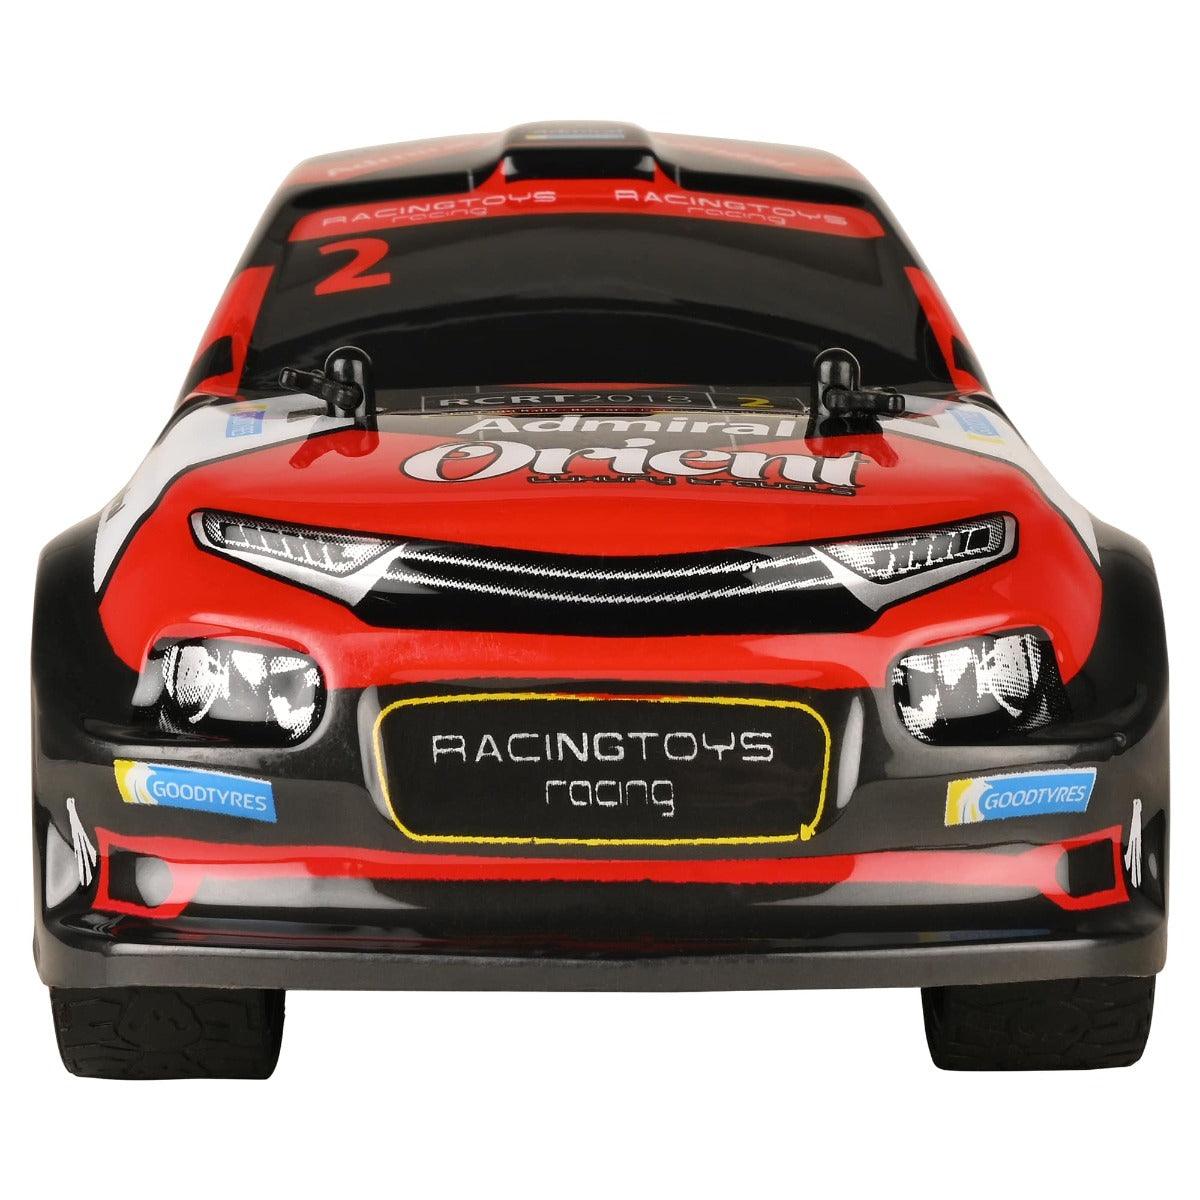 Playzu Rally Xtreme 1:16 Scale R/C Car - Red for Ages 6+